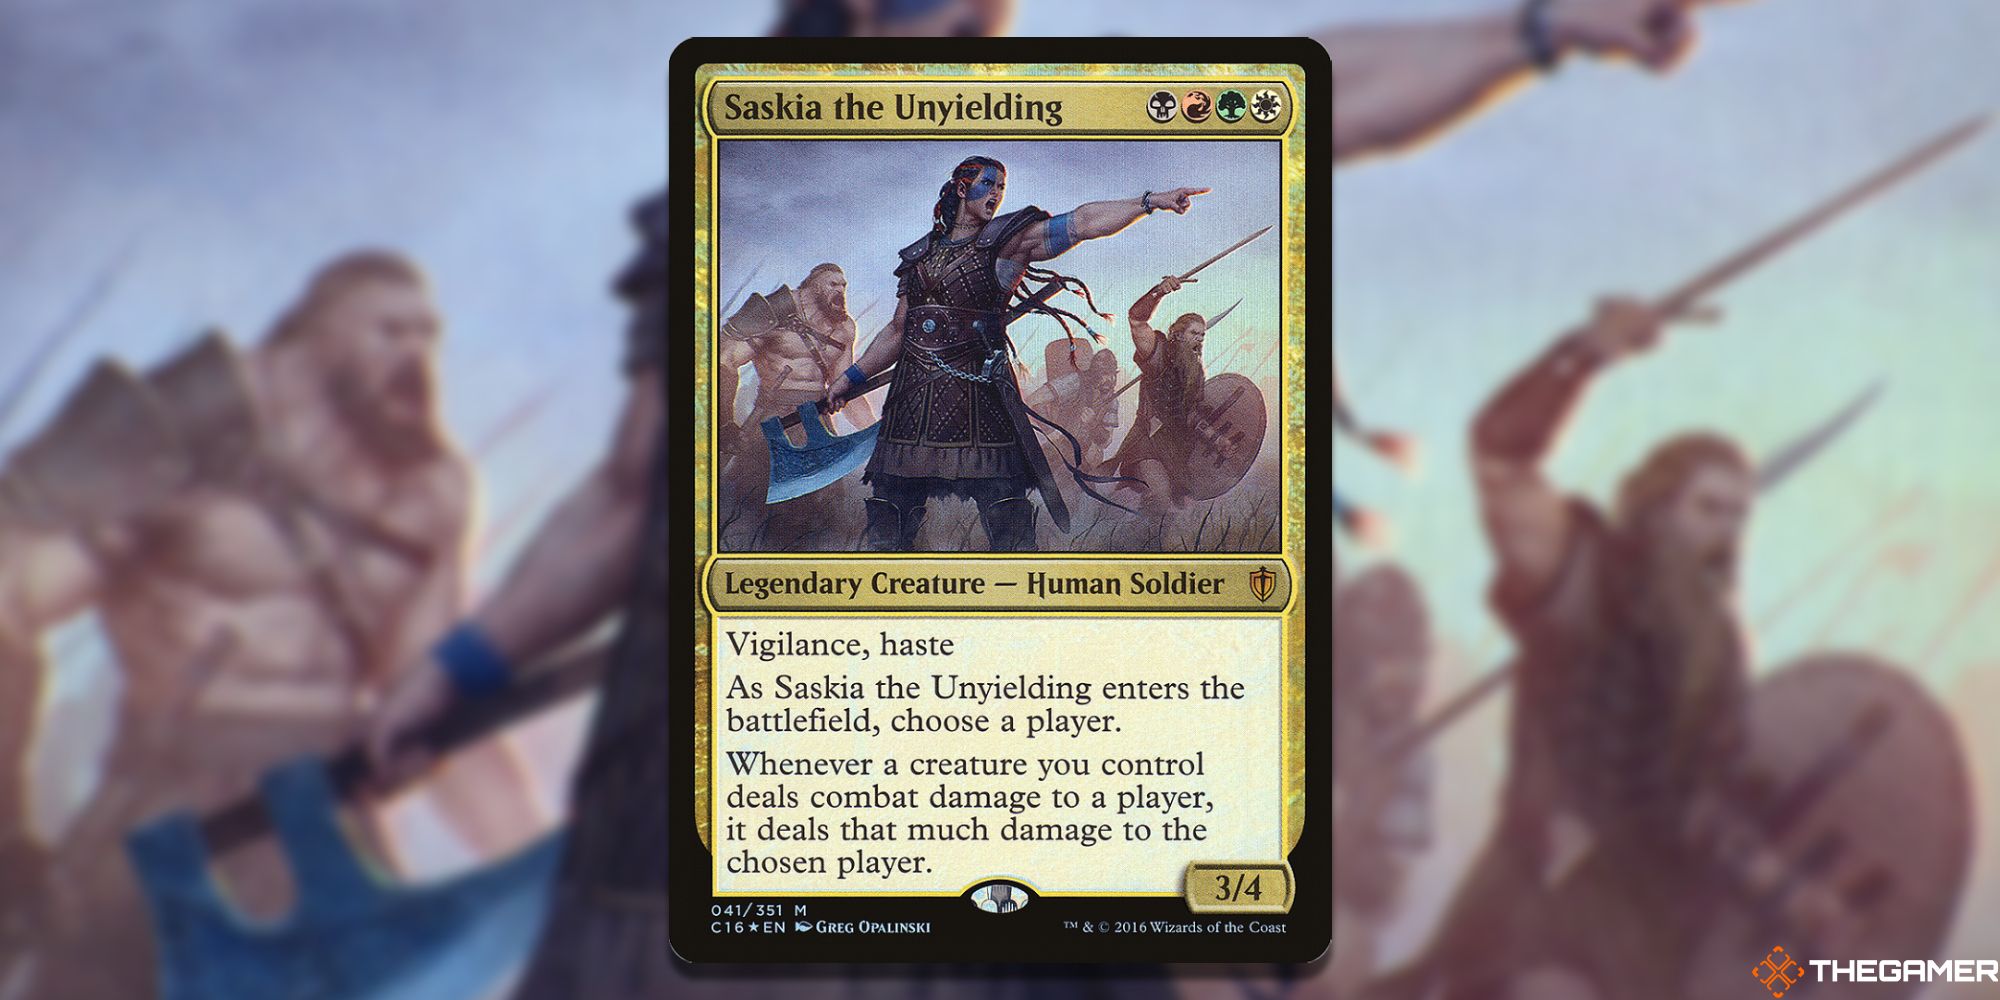 Image of the Saskia The Unyielding card in Magic: The Gathering, with art by Greg Opalinski